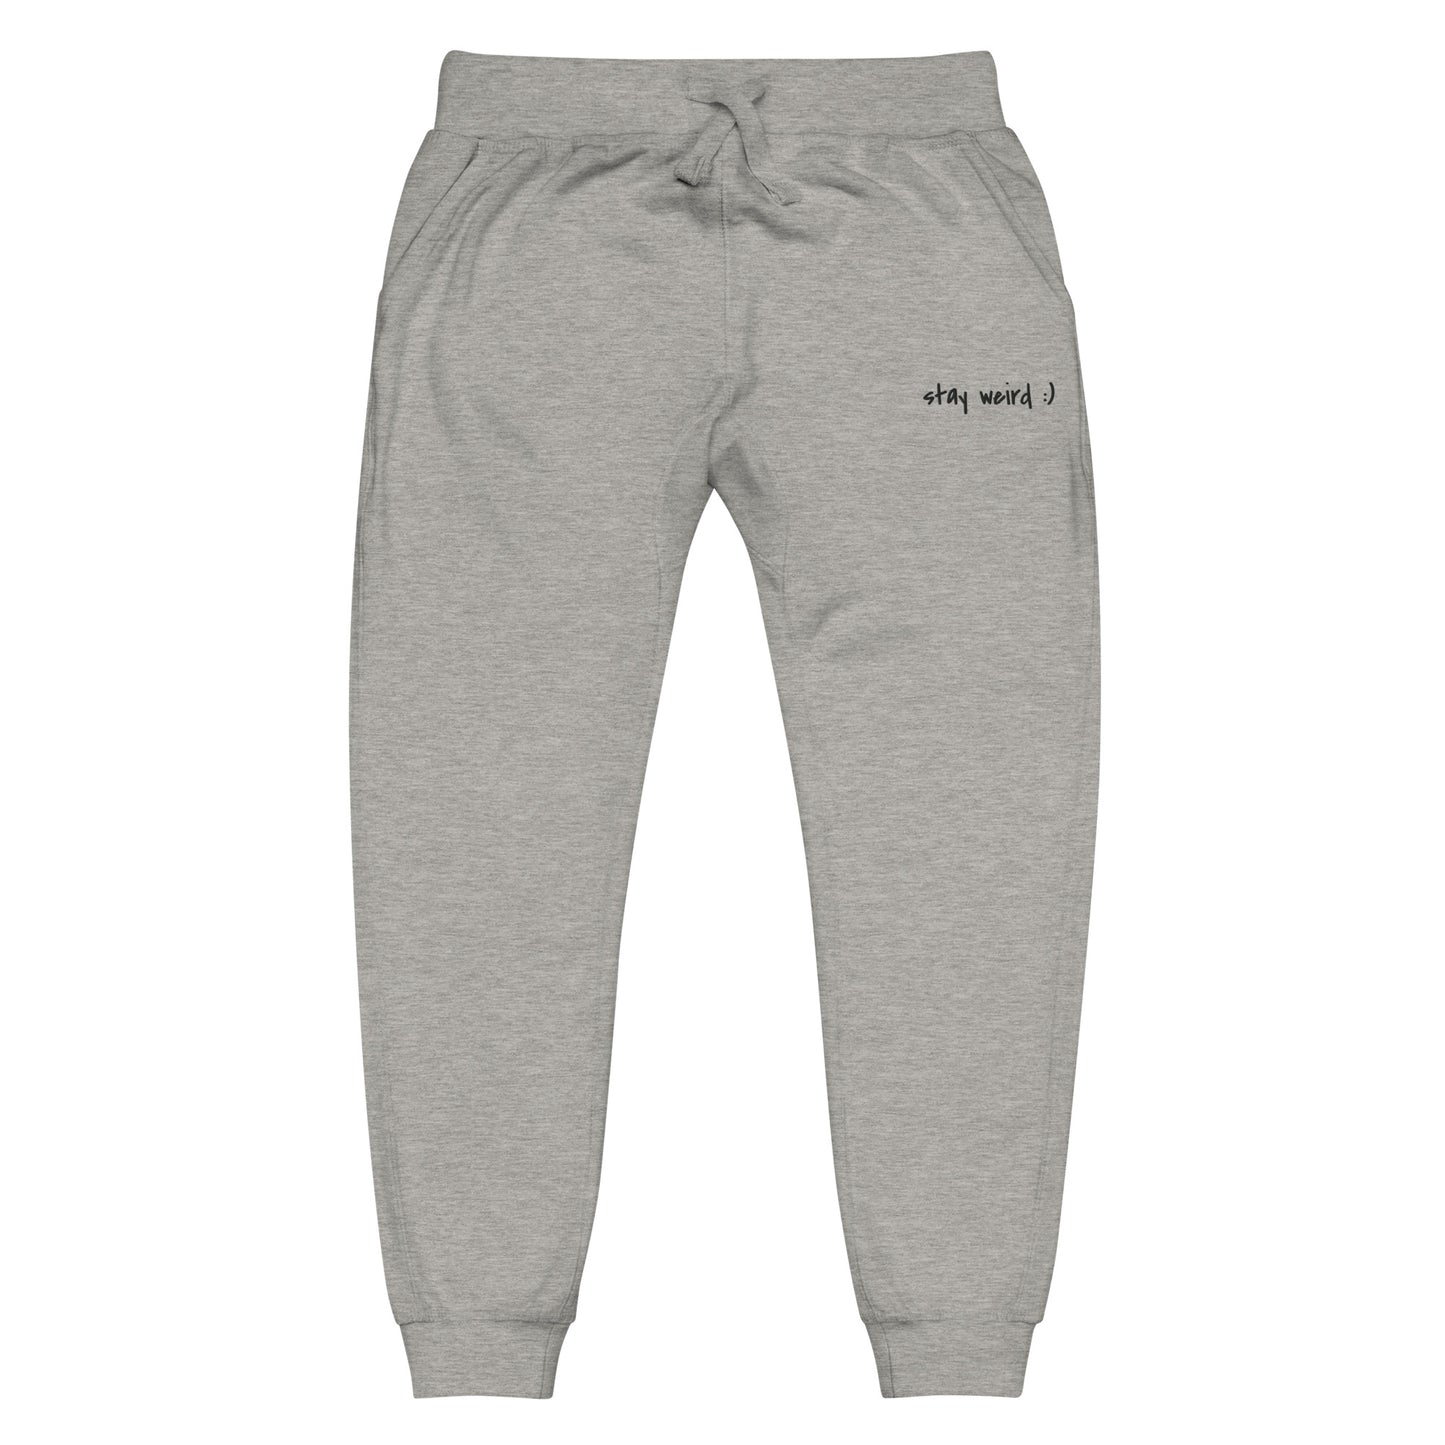 Stay Weird :) Sweatpants (embroidered)